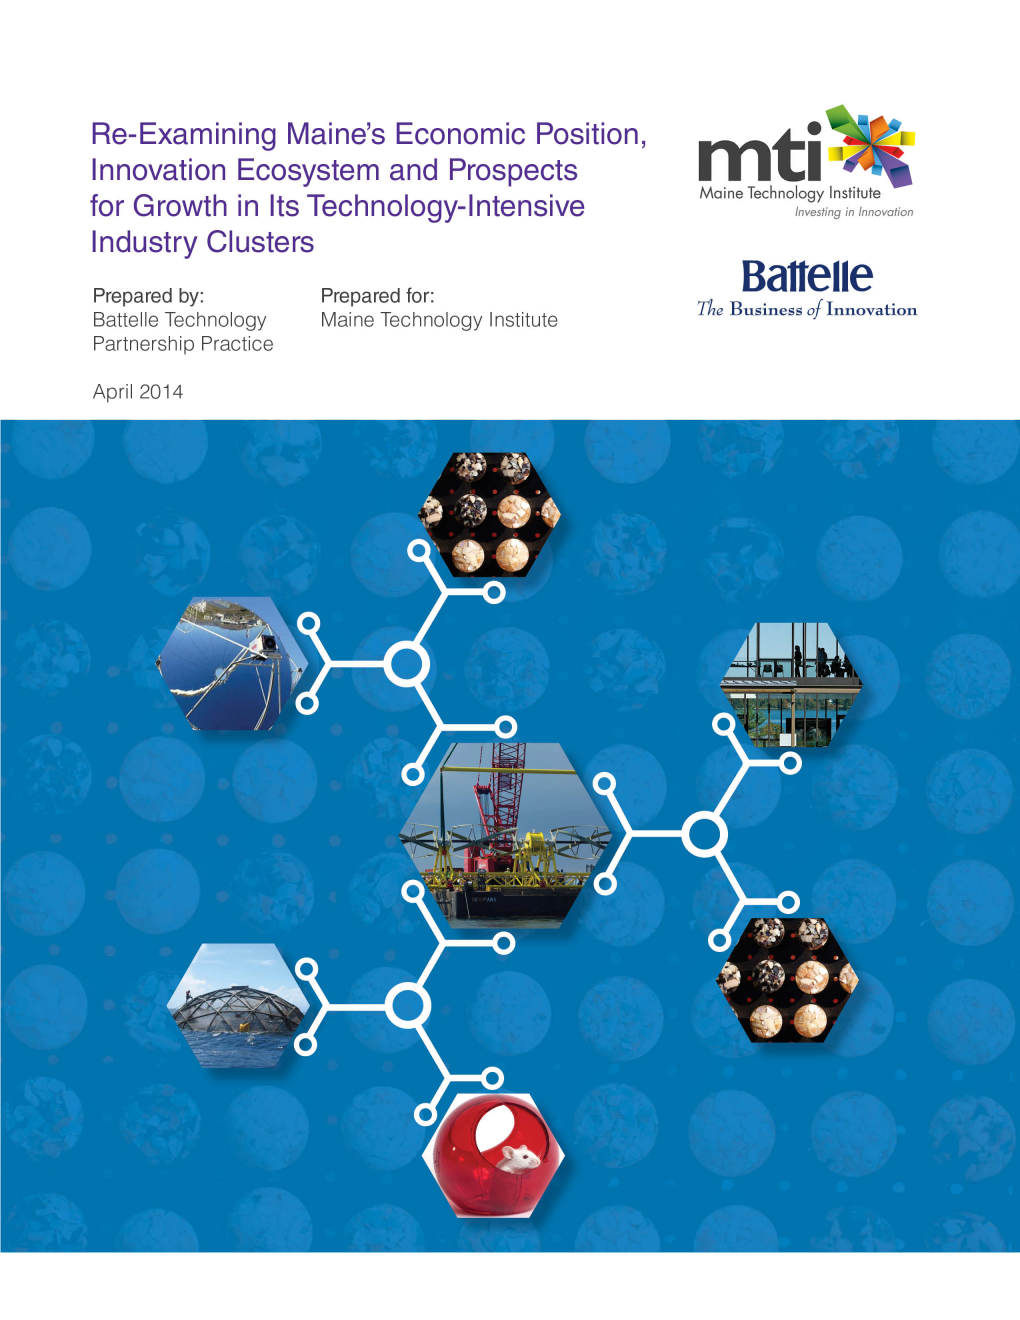 Maine's Technology-Intensive Industry Clusters